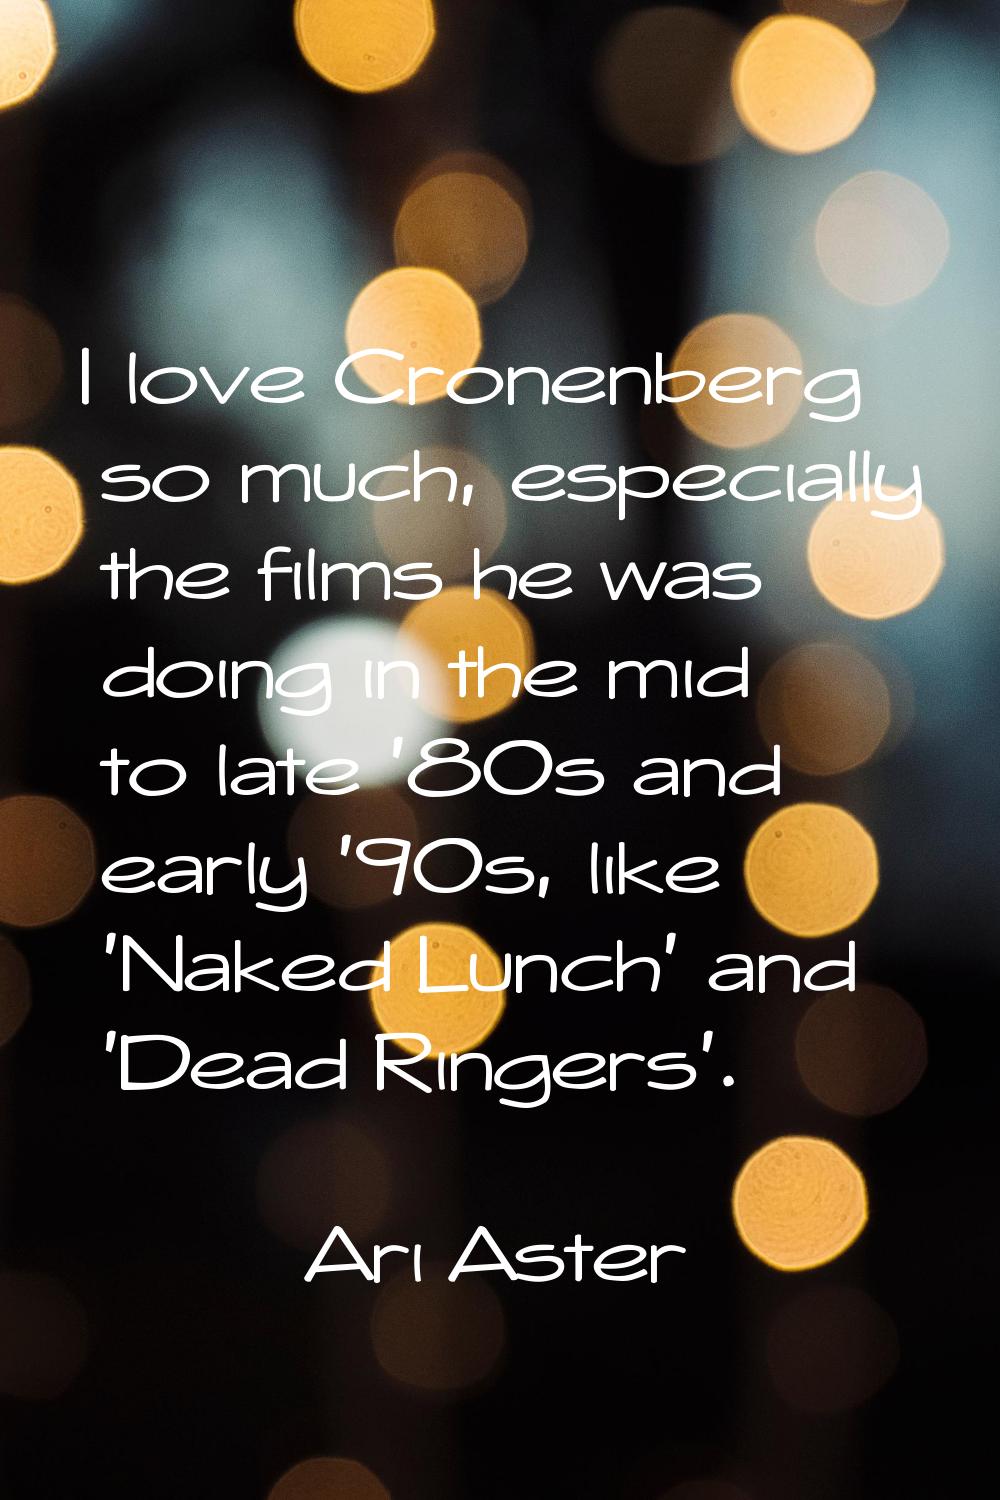 I love Cronenberg so much, especially the films he was doing in the mid to late '80s and early '90s